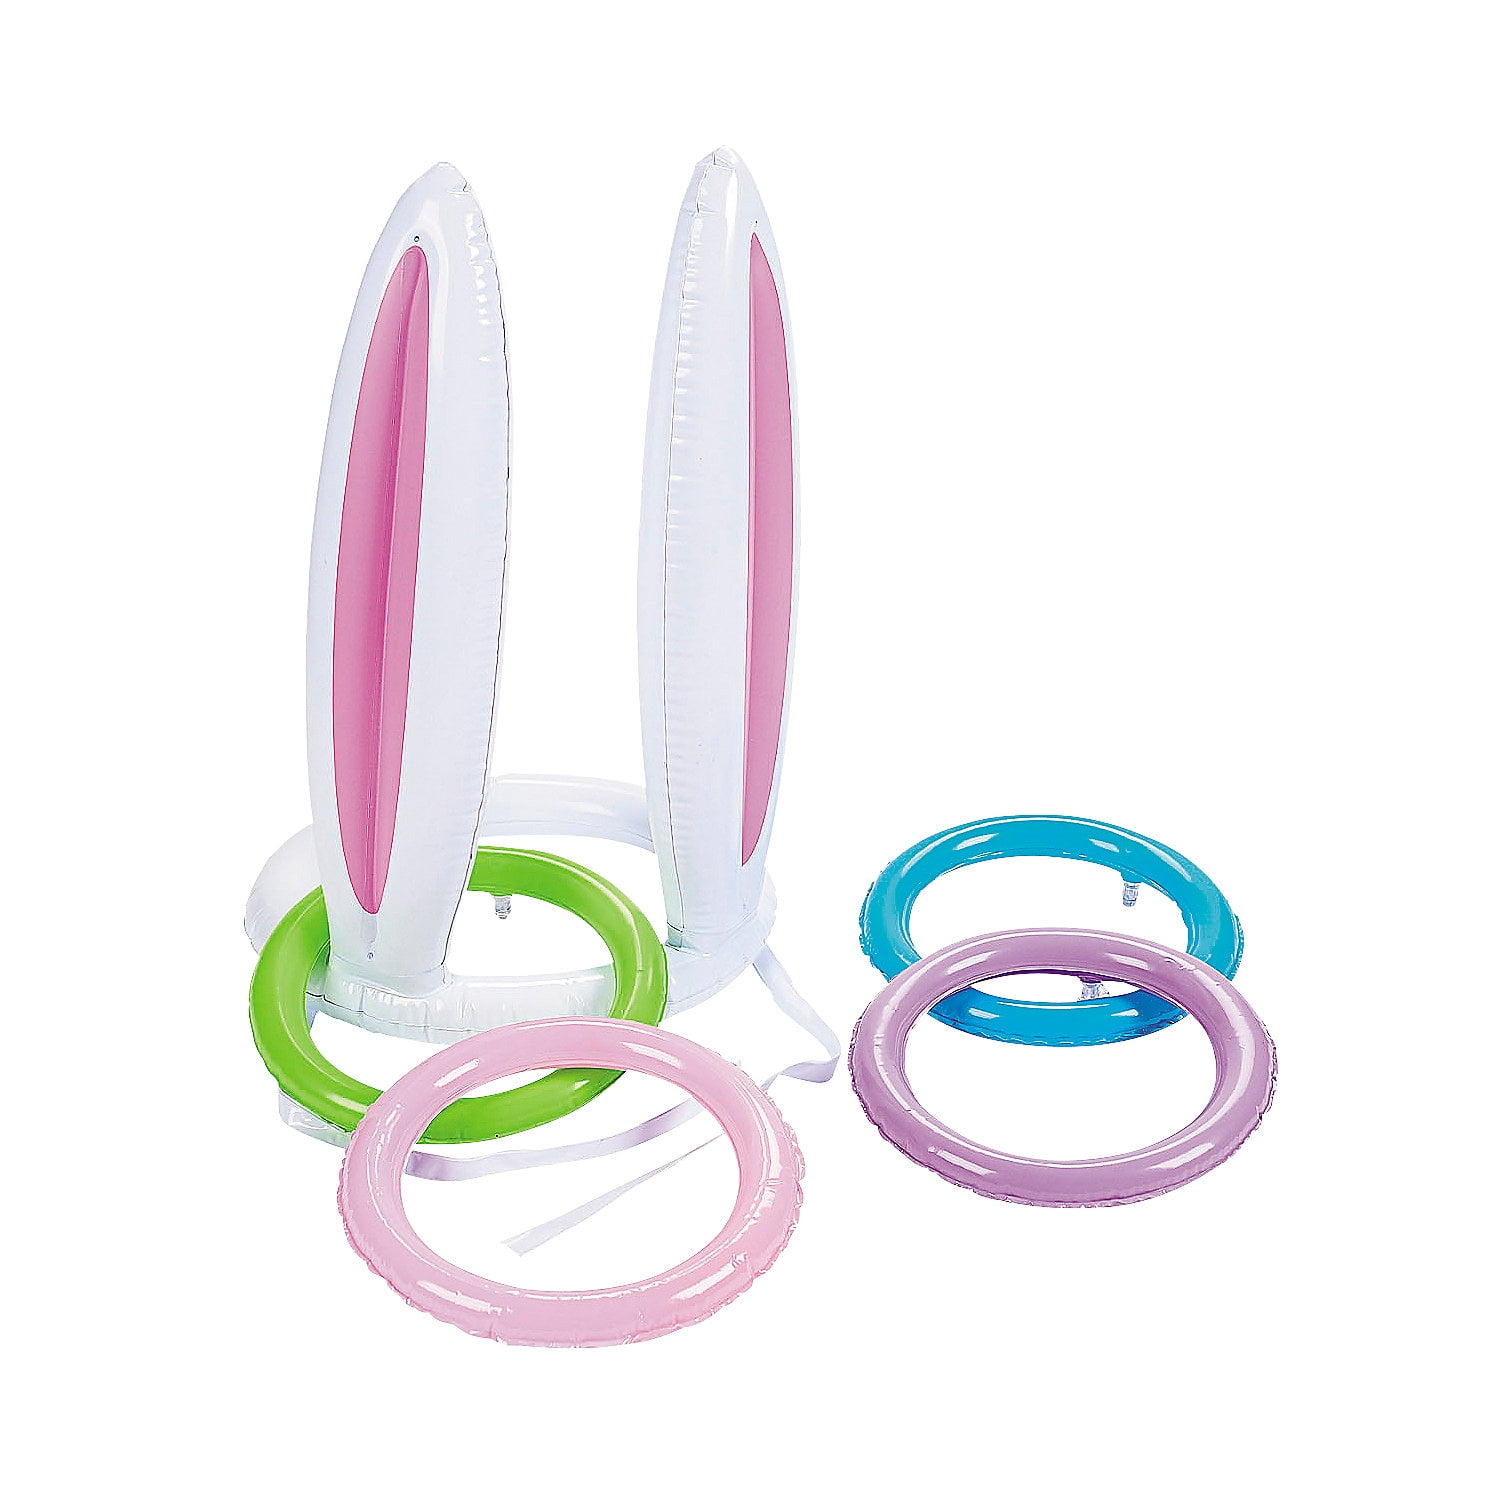 Easter Basket Stuffers 3pcs Inflatable Bunny Ear and 15pcs Rings and 1pc Inflator for Kids Family Decorations Easter Party Supplies Satkago Easter Bunny Ears Ring Toss 